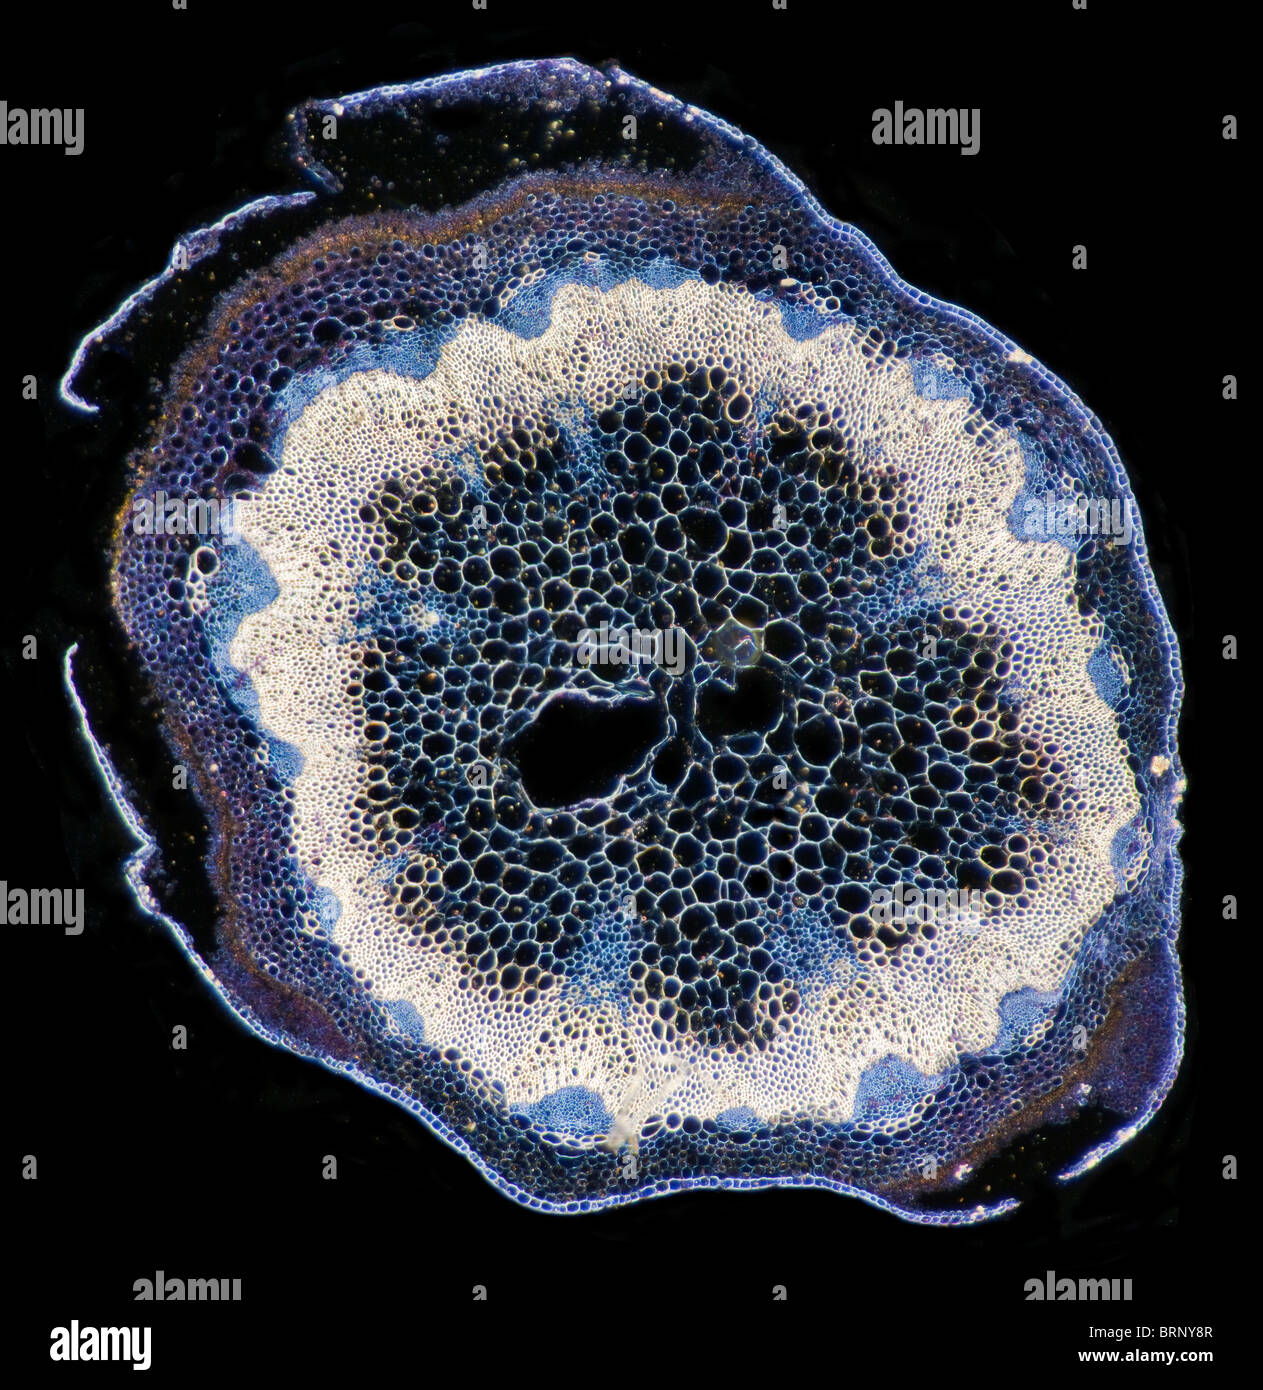 Darkfield photomicrograph of Cystopus candidus, fungus growing on root of Sheperds Purse Stock Photo